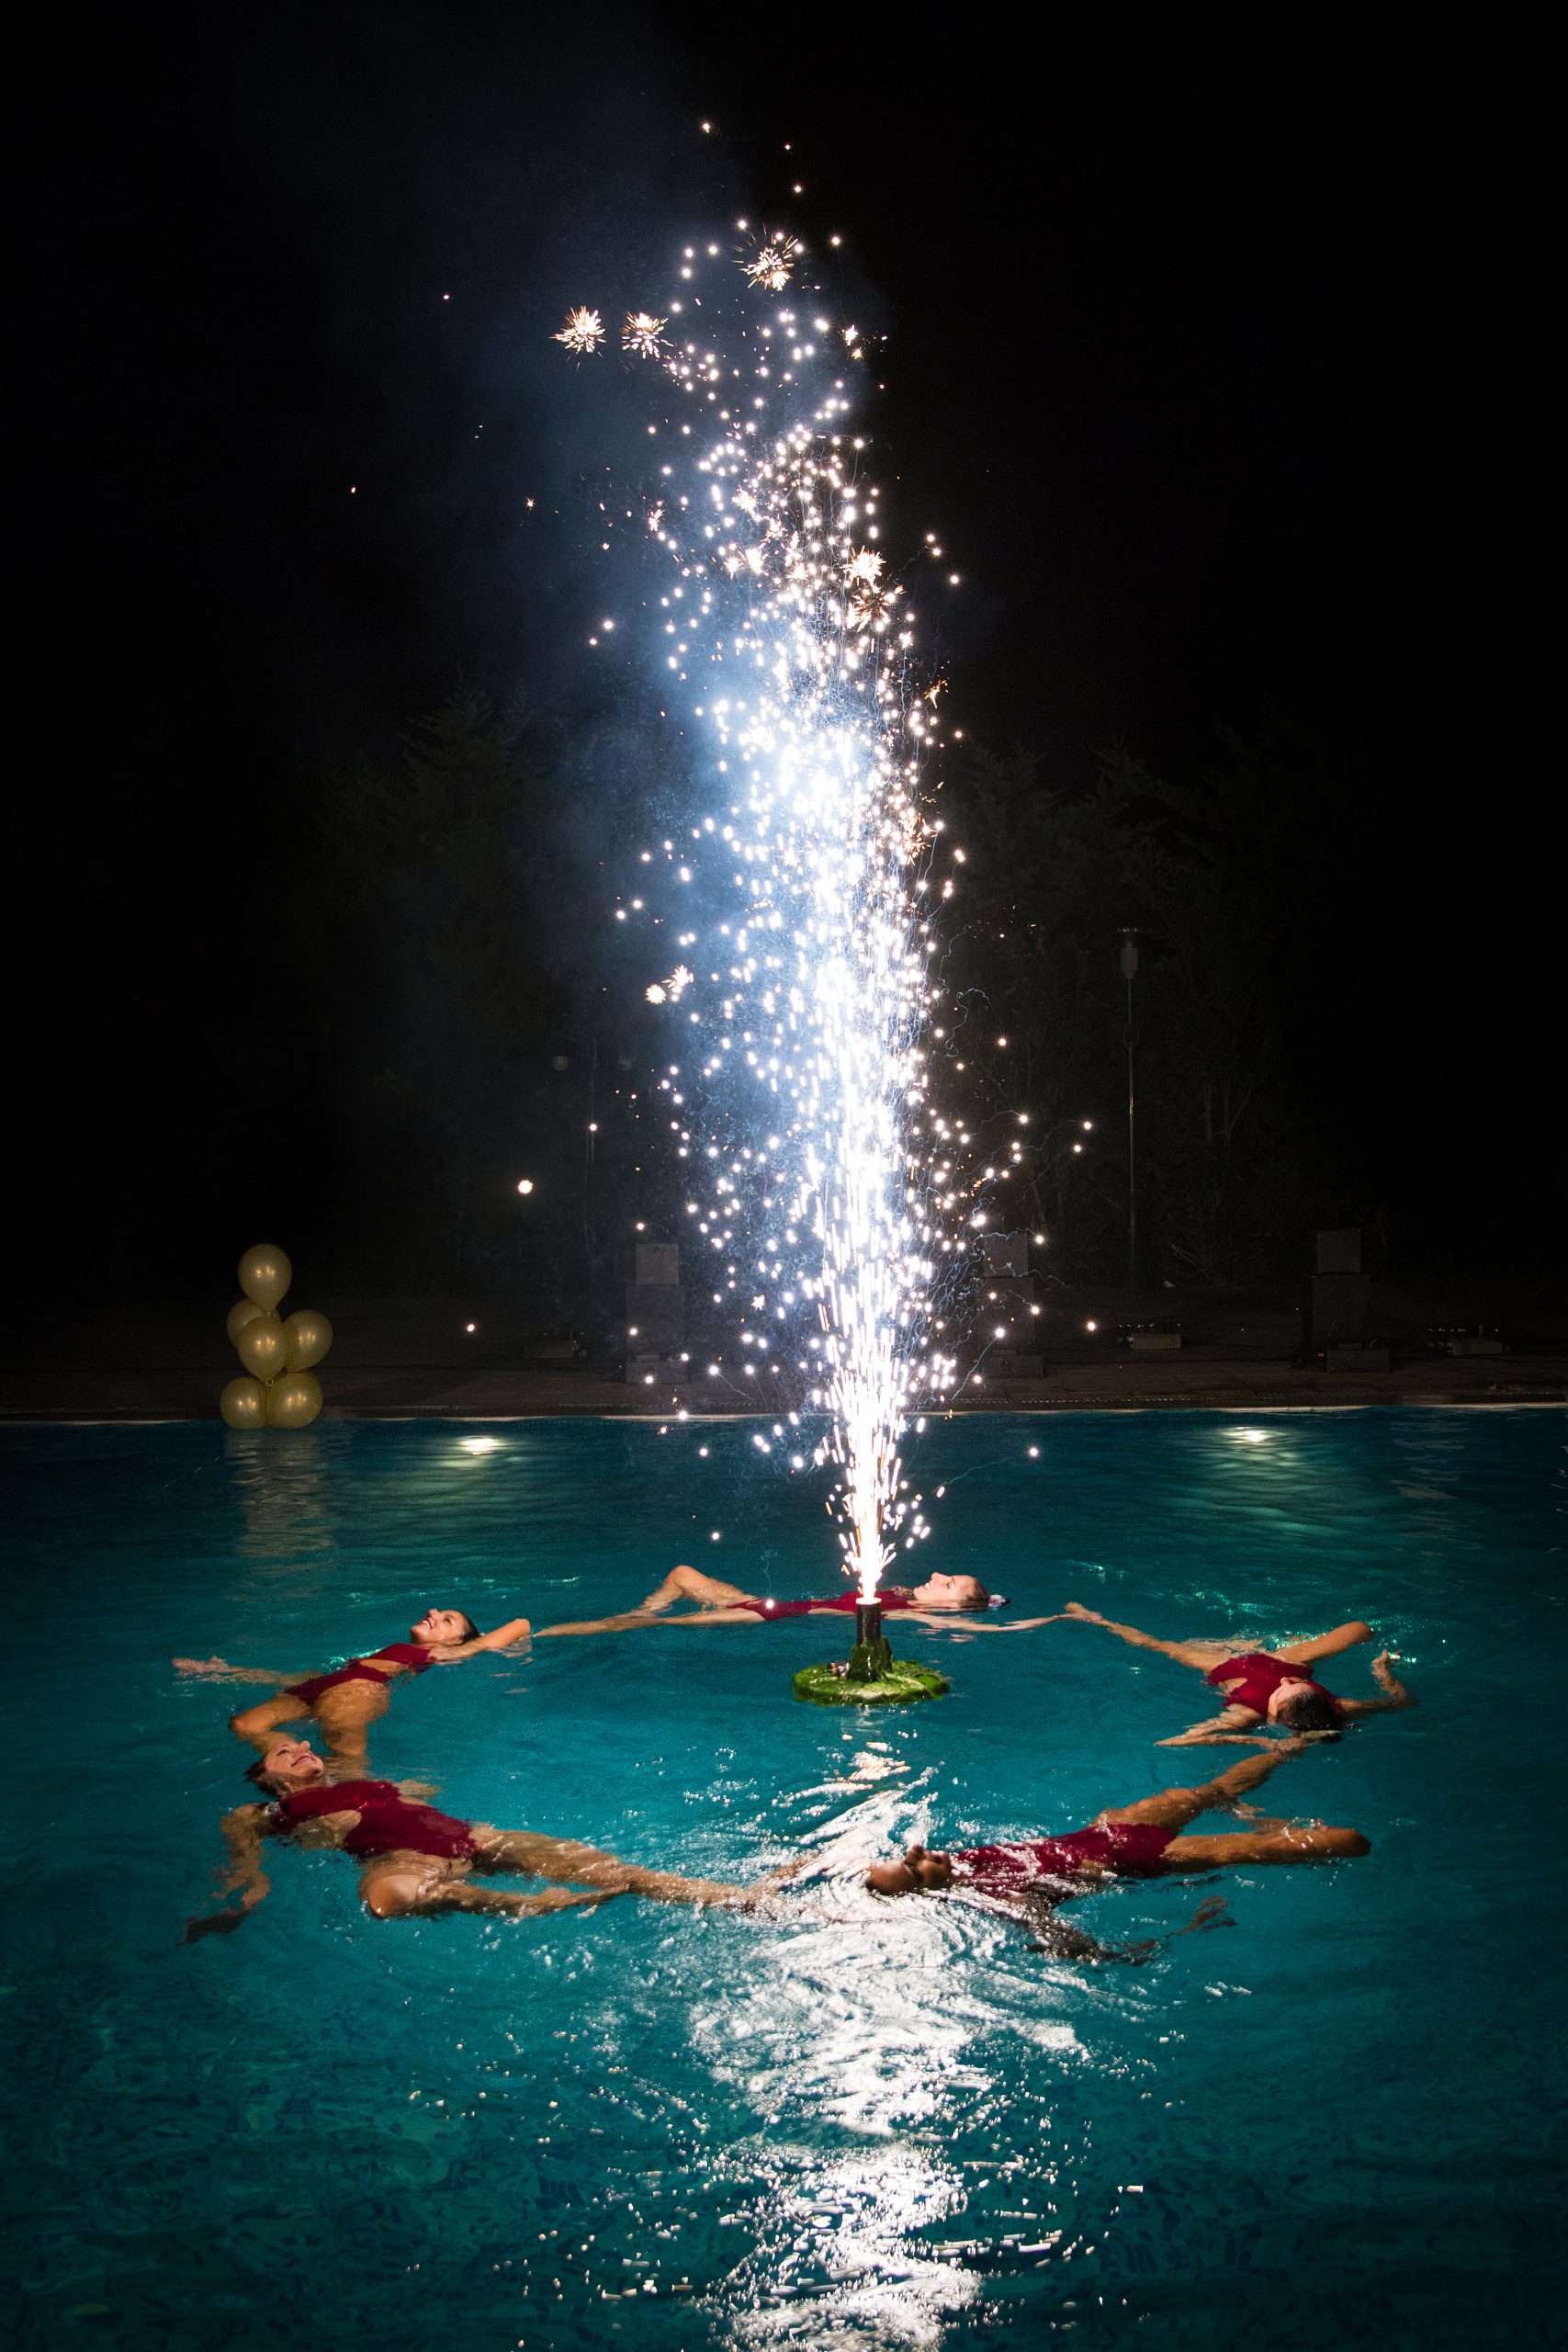 inflatable fireworks surrunded by synchronised swimmers